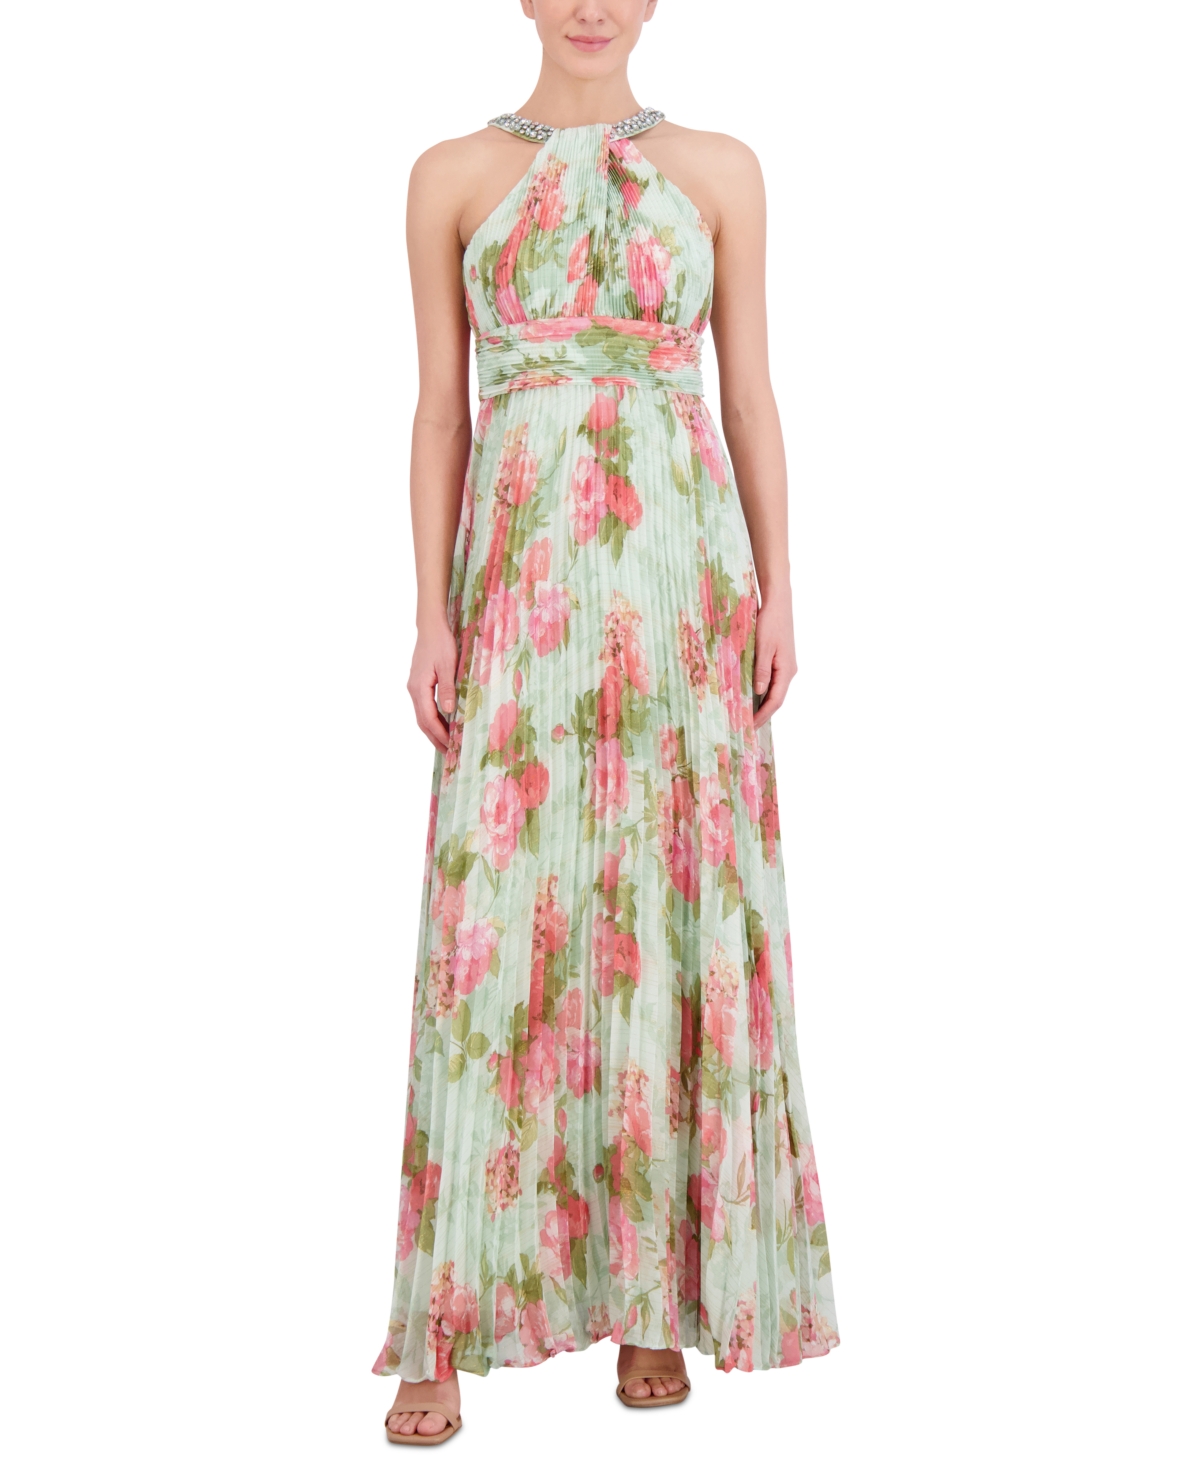 Women's Embellished-Neck Pleated Sleeveless Gown - Green Multi